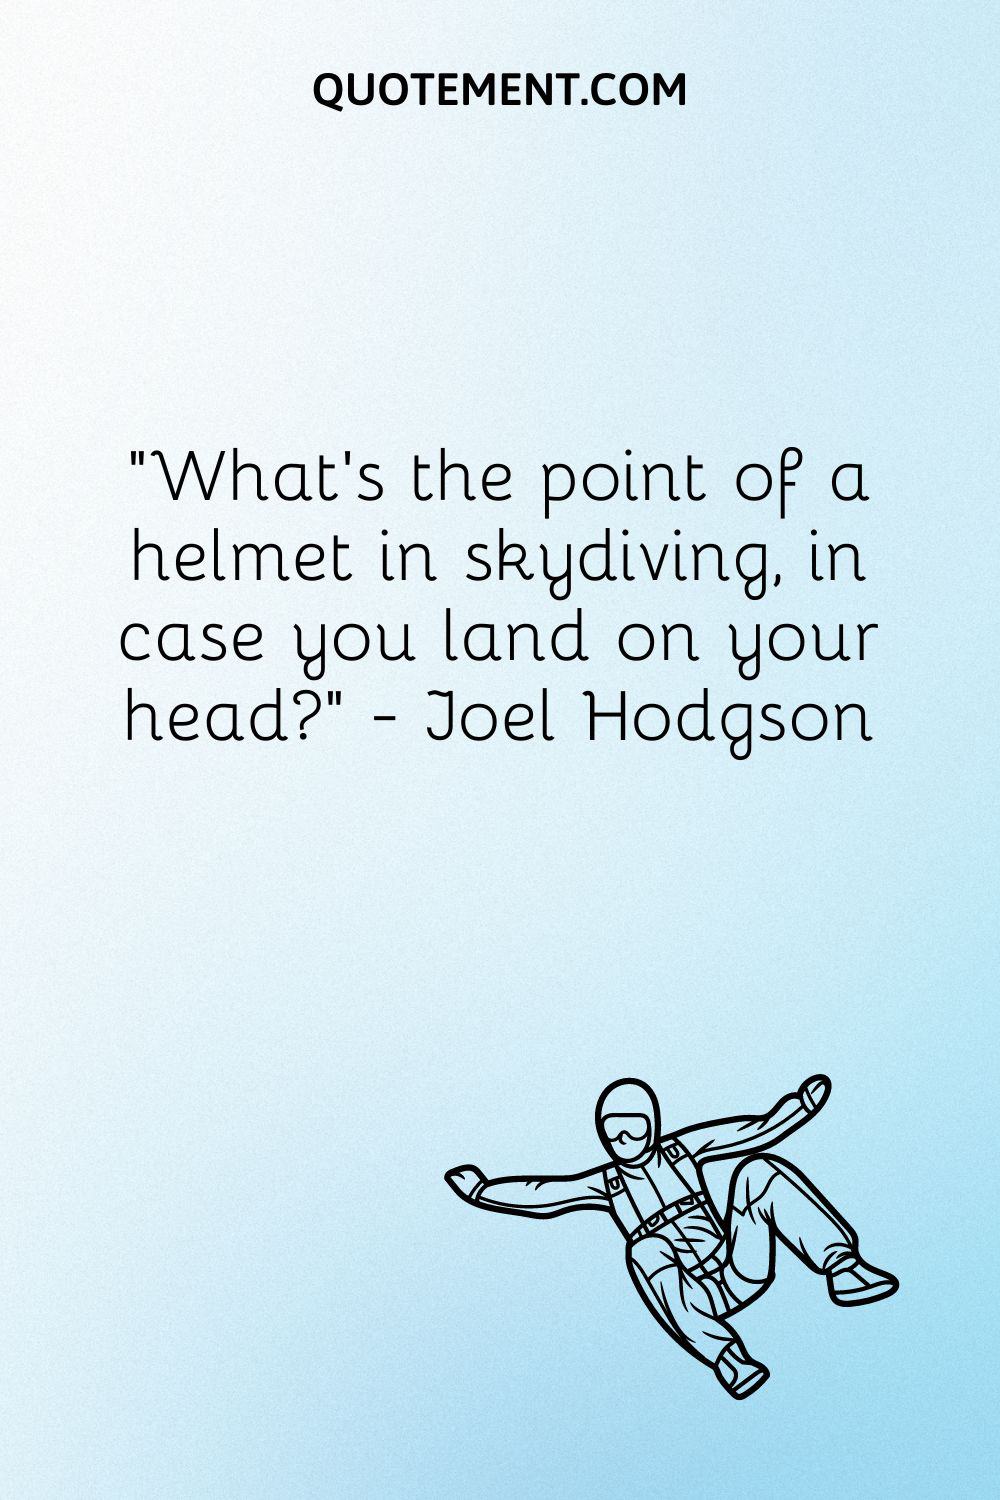 What’s the point of a helmet in skydiving, in case you land on your head